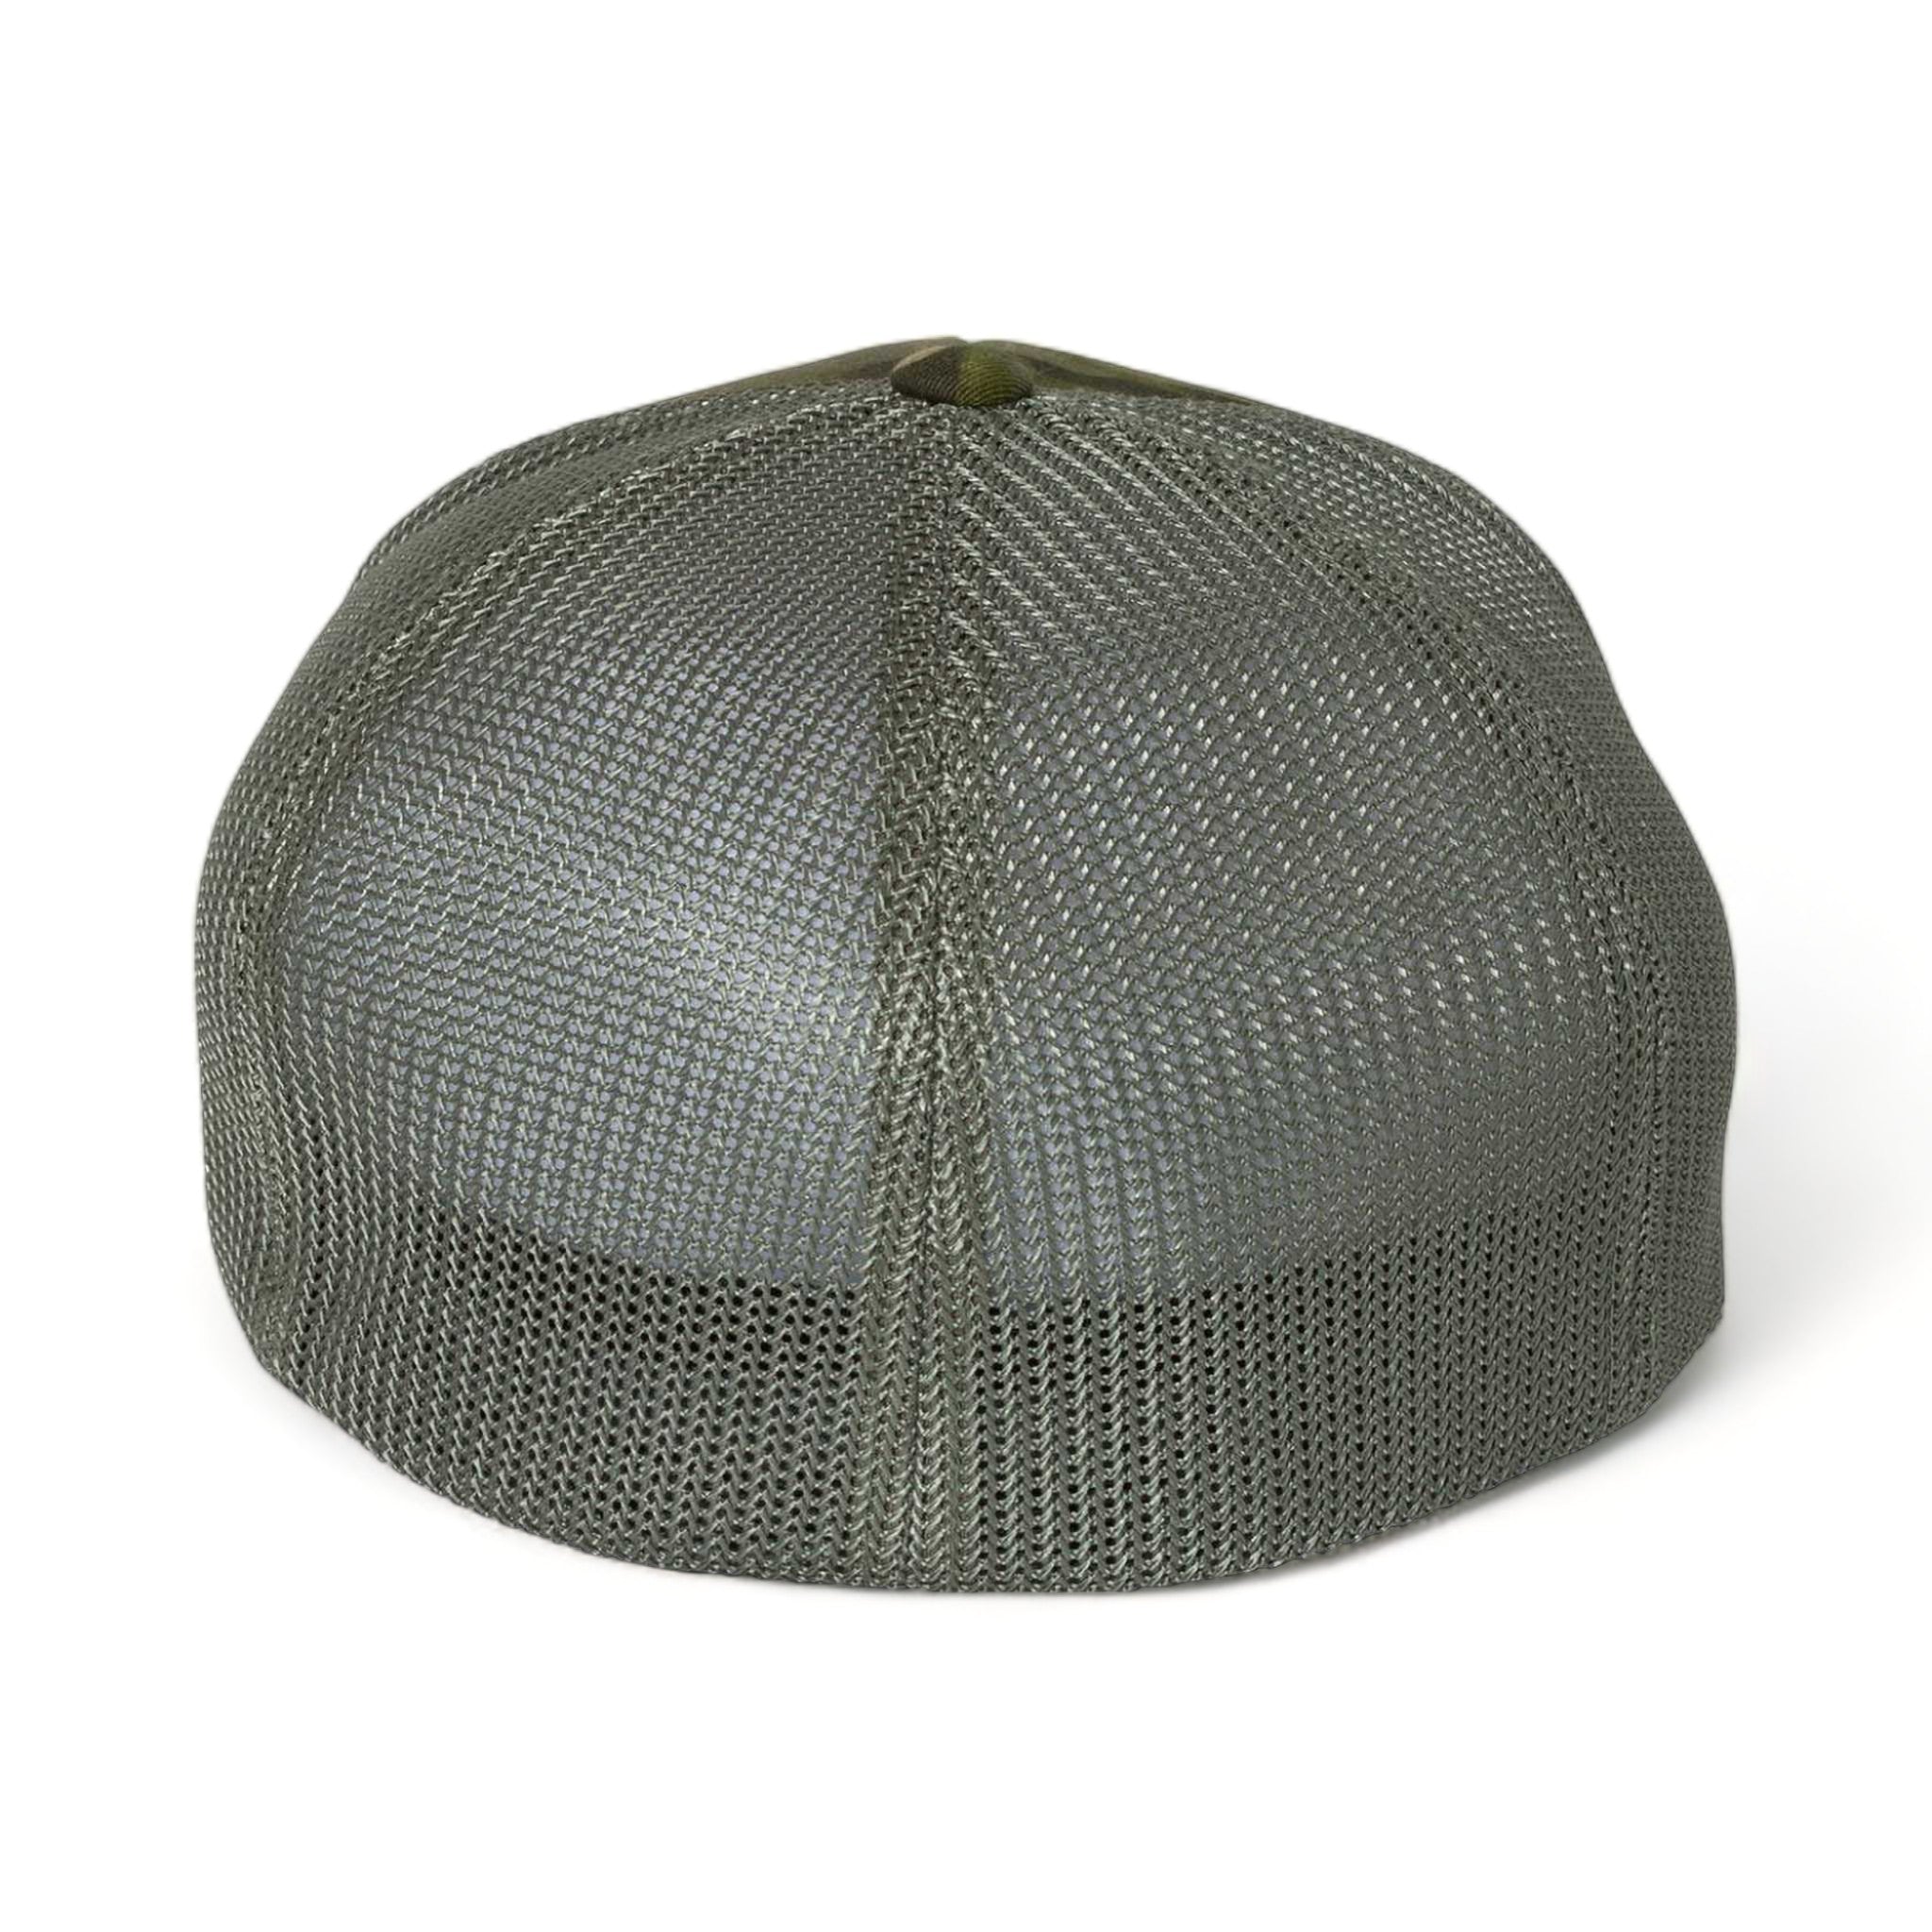 Back view of Flexfit 6511 custom hat in multicam tropic and green